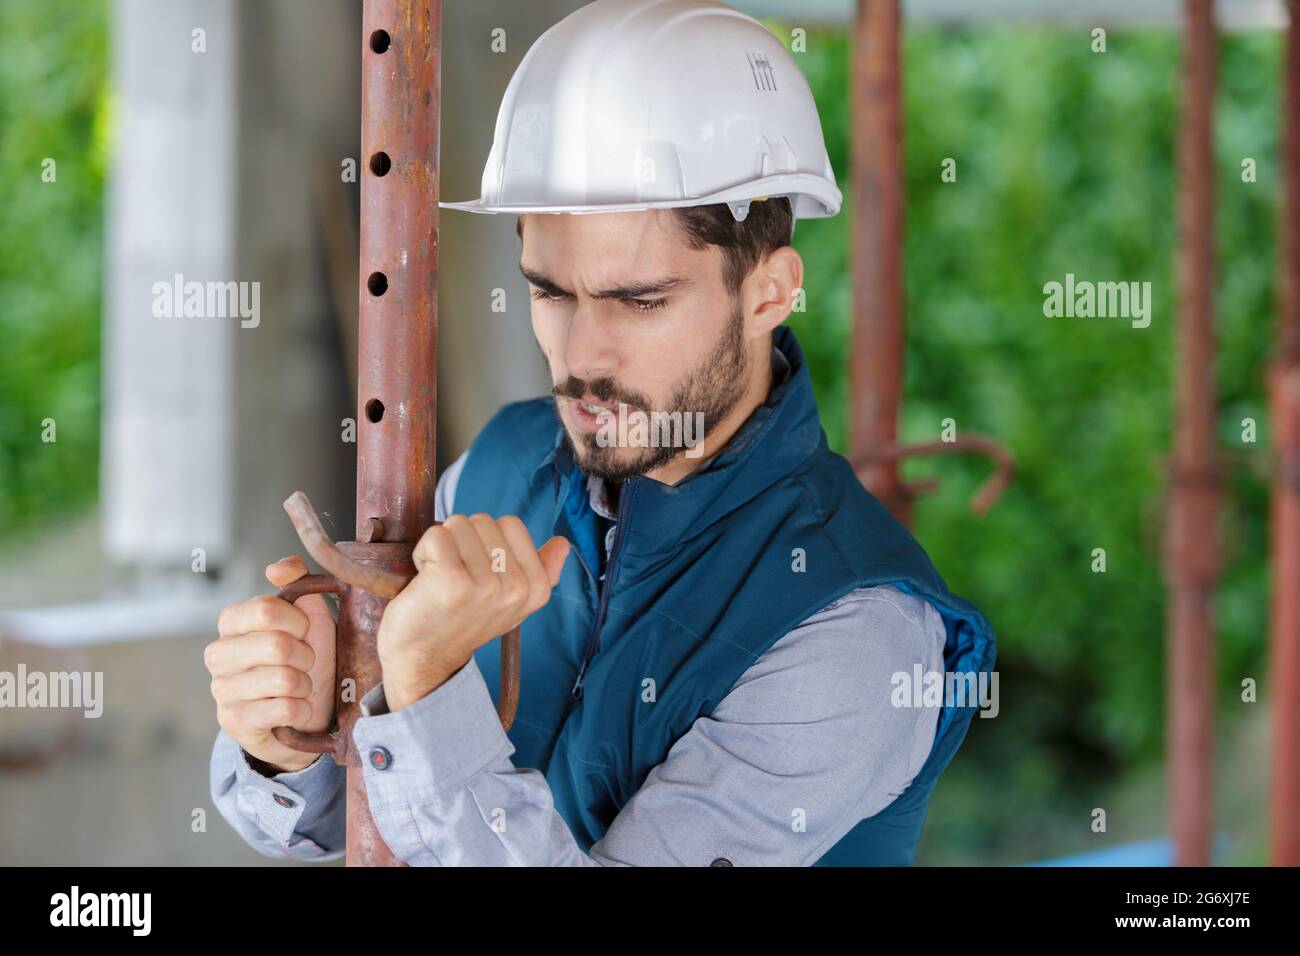 man working on a water pipe Stock Photo